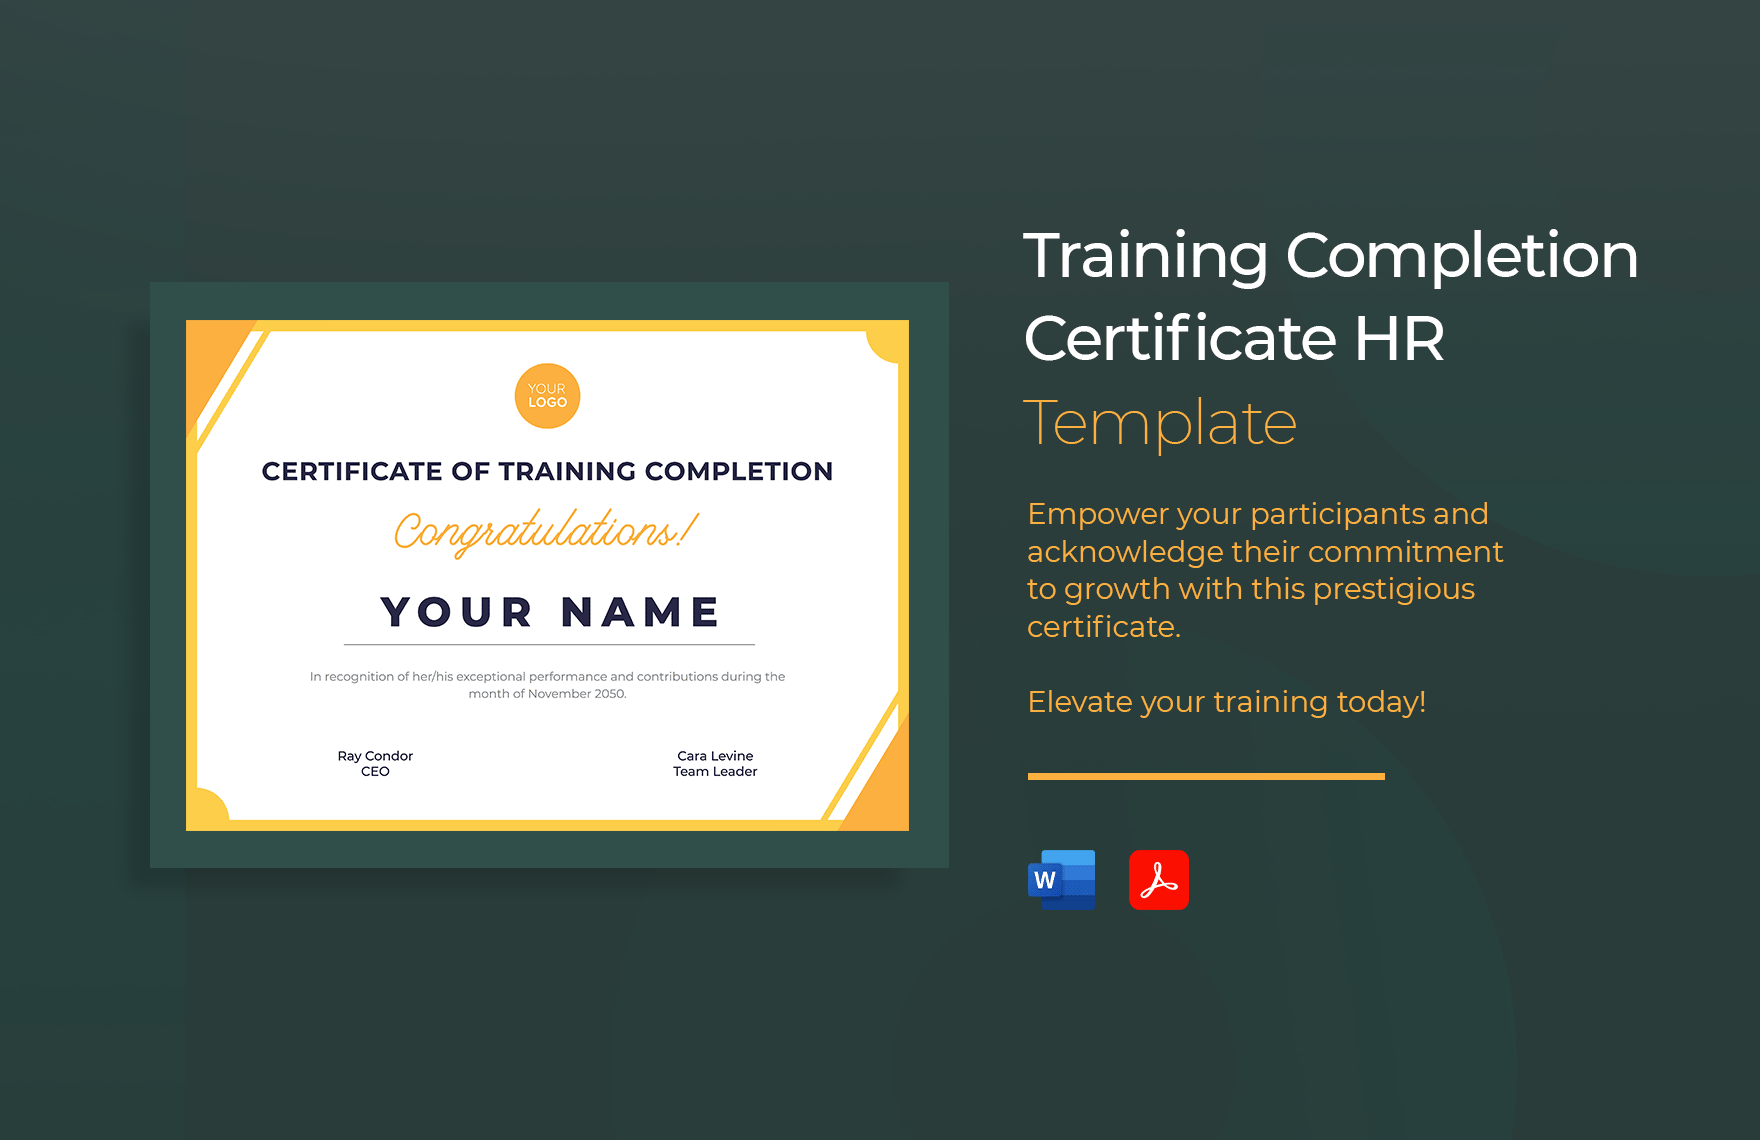 Training Completion Certificate HR Template